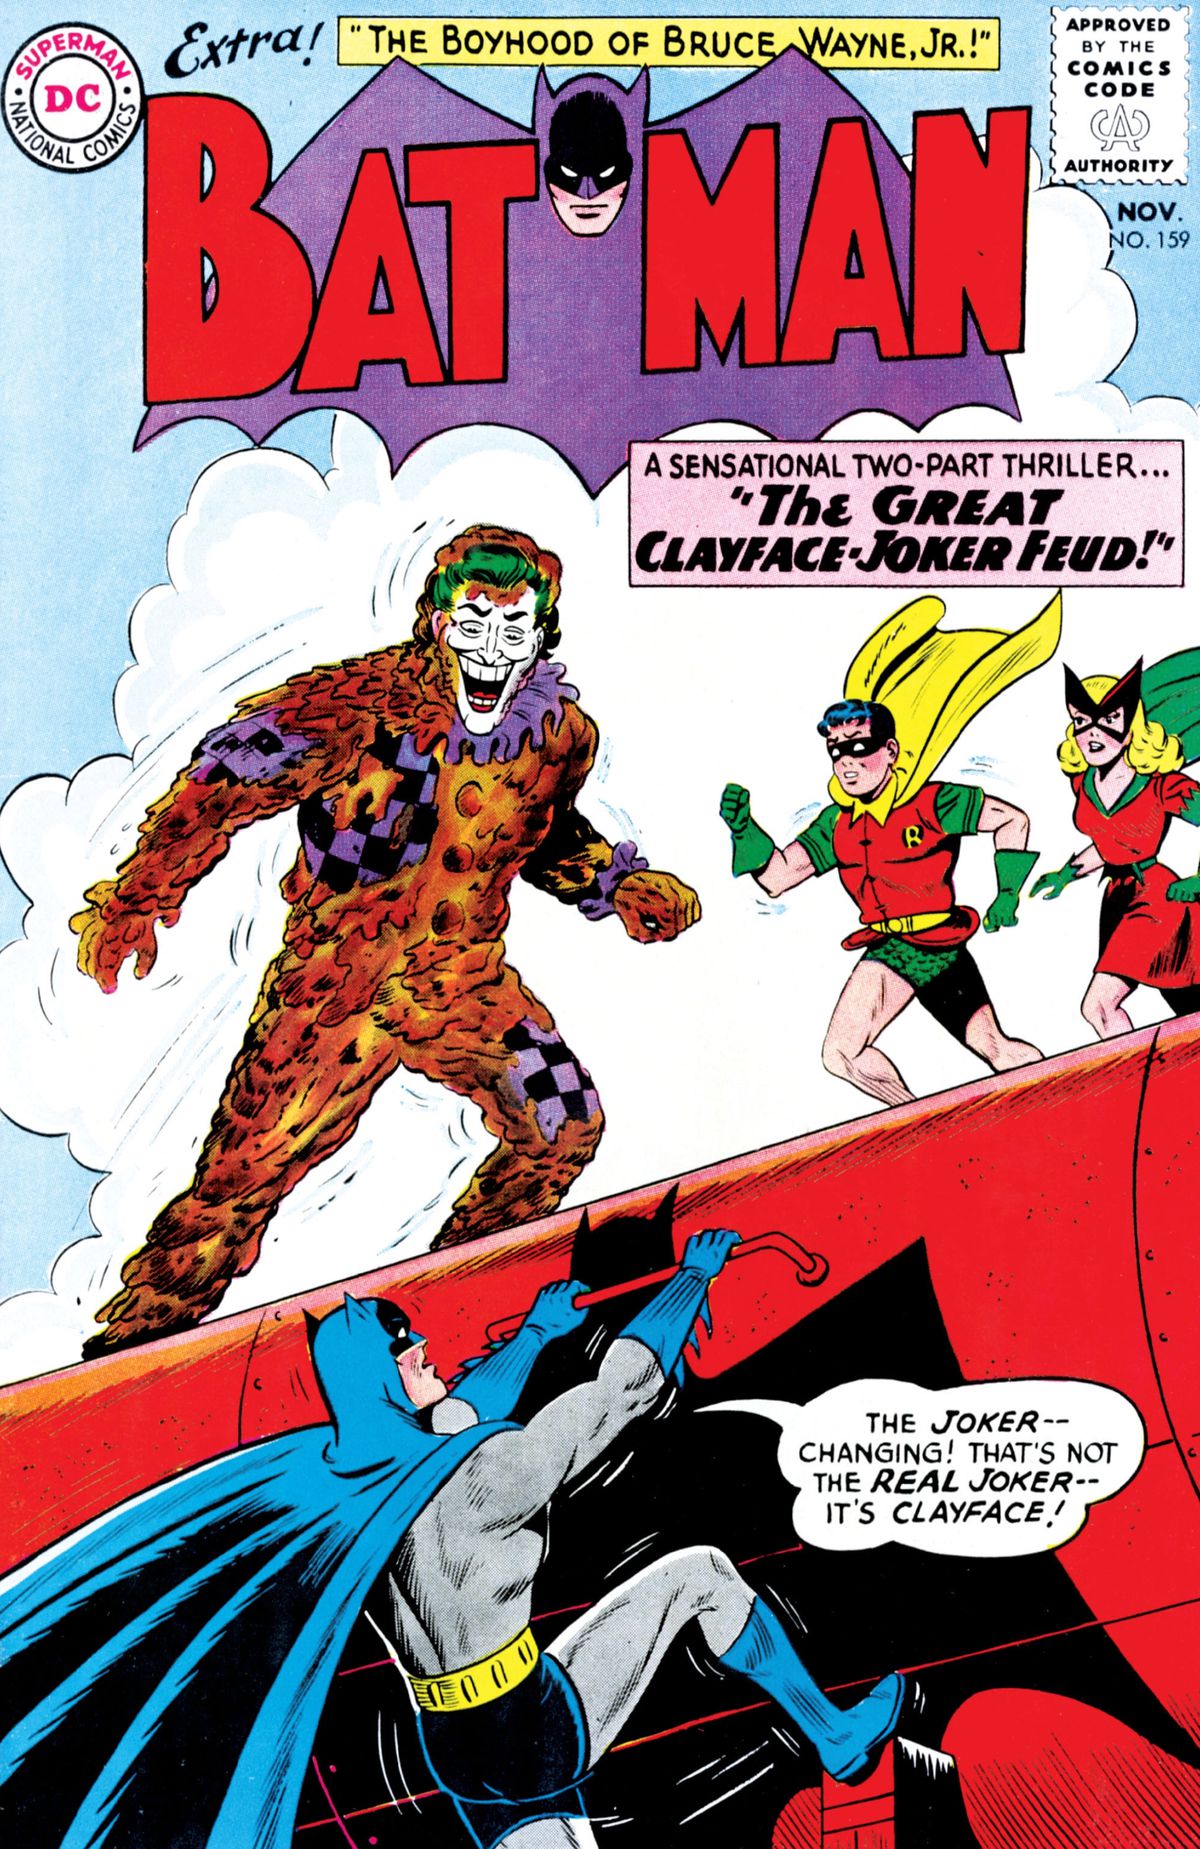 Robin and Bat-girl run onto the scene, a Clayface, masquerading as the Joker, menaces Batman on the wing of an airplane, on the cover of Batman #159, DC Comics (1963). 